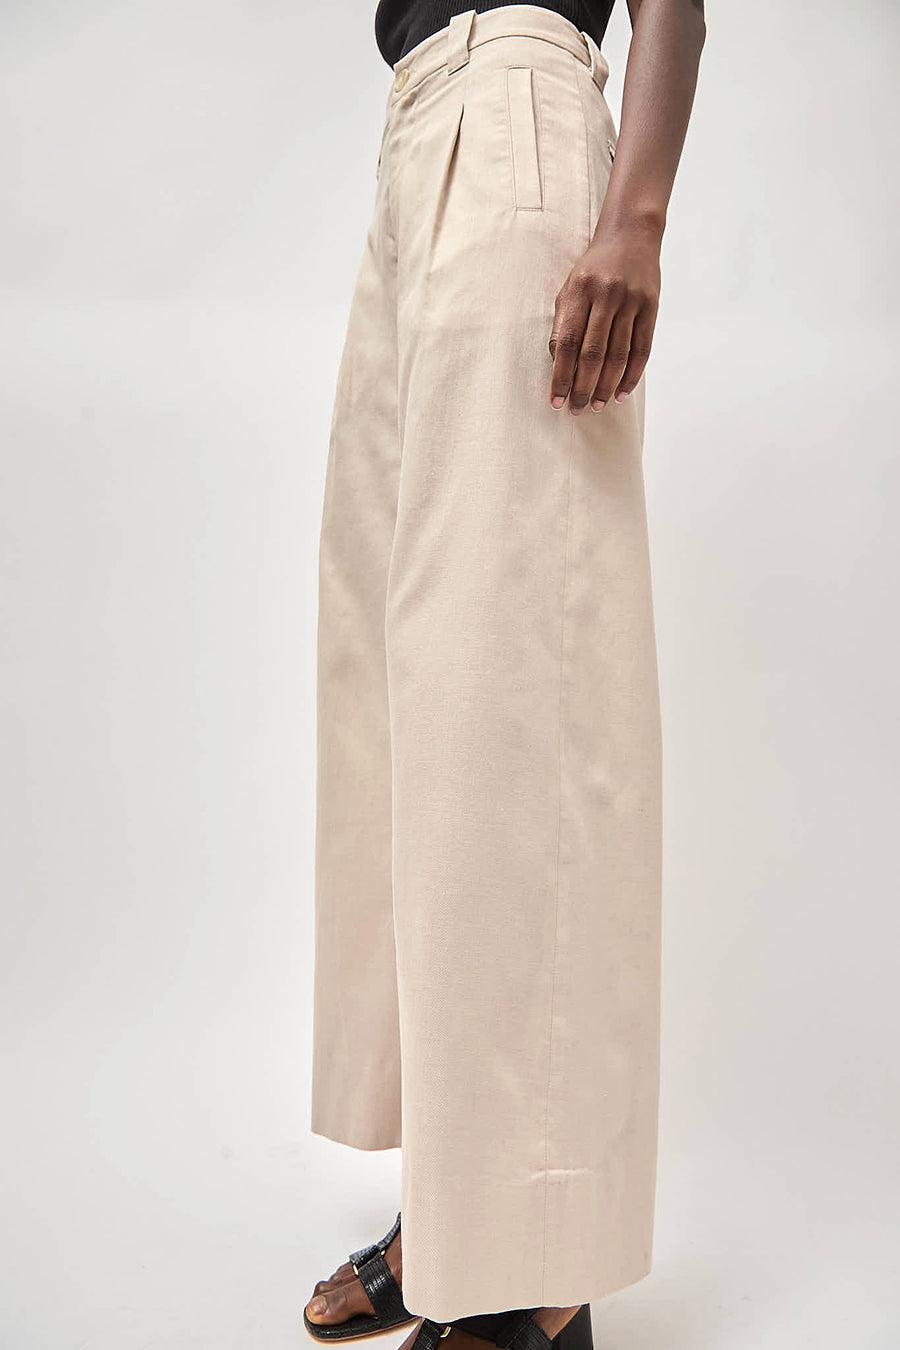 No.6 Kent Pant in Stone